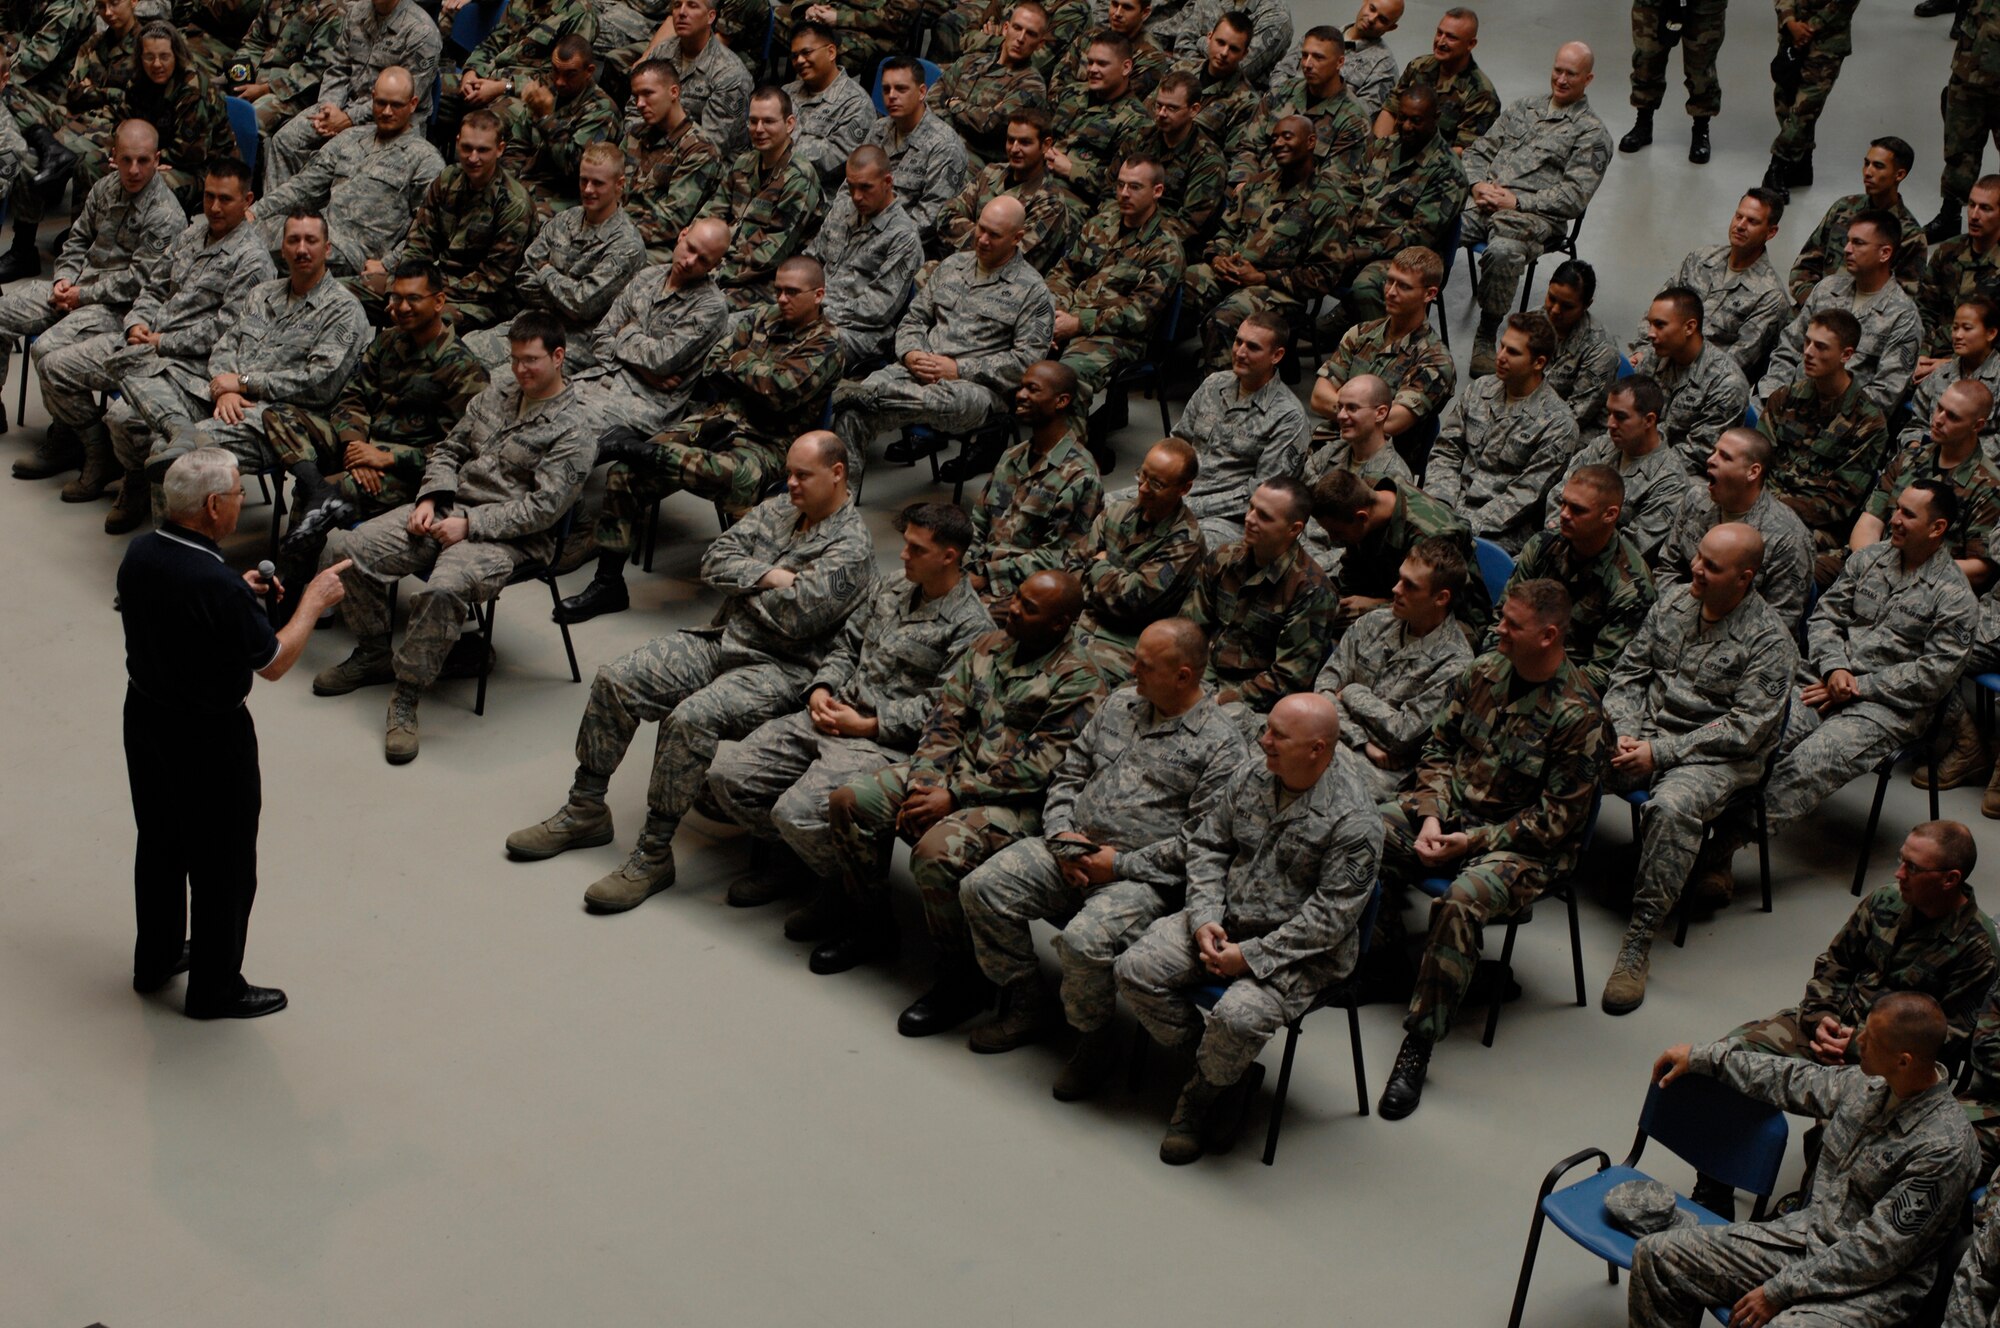 Retired Chief Master Sgt. of the Air Force Robert D. Gaylor speaks to hundreds of Airmen in the 1st Combat Communications Squadron, Aug. 8, 2008, Ramstein Air Base, Germany.  Chief Gaylor is known for his motivational speeches.  He travelled to Avaino Air Base, Italy and Spangdahlem Air Base, Germany as well to speak to a hundred more Airmen.  (U.S. Air Force photo by Senior Airman Amber Bressler)(Released)